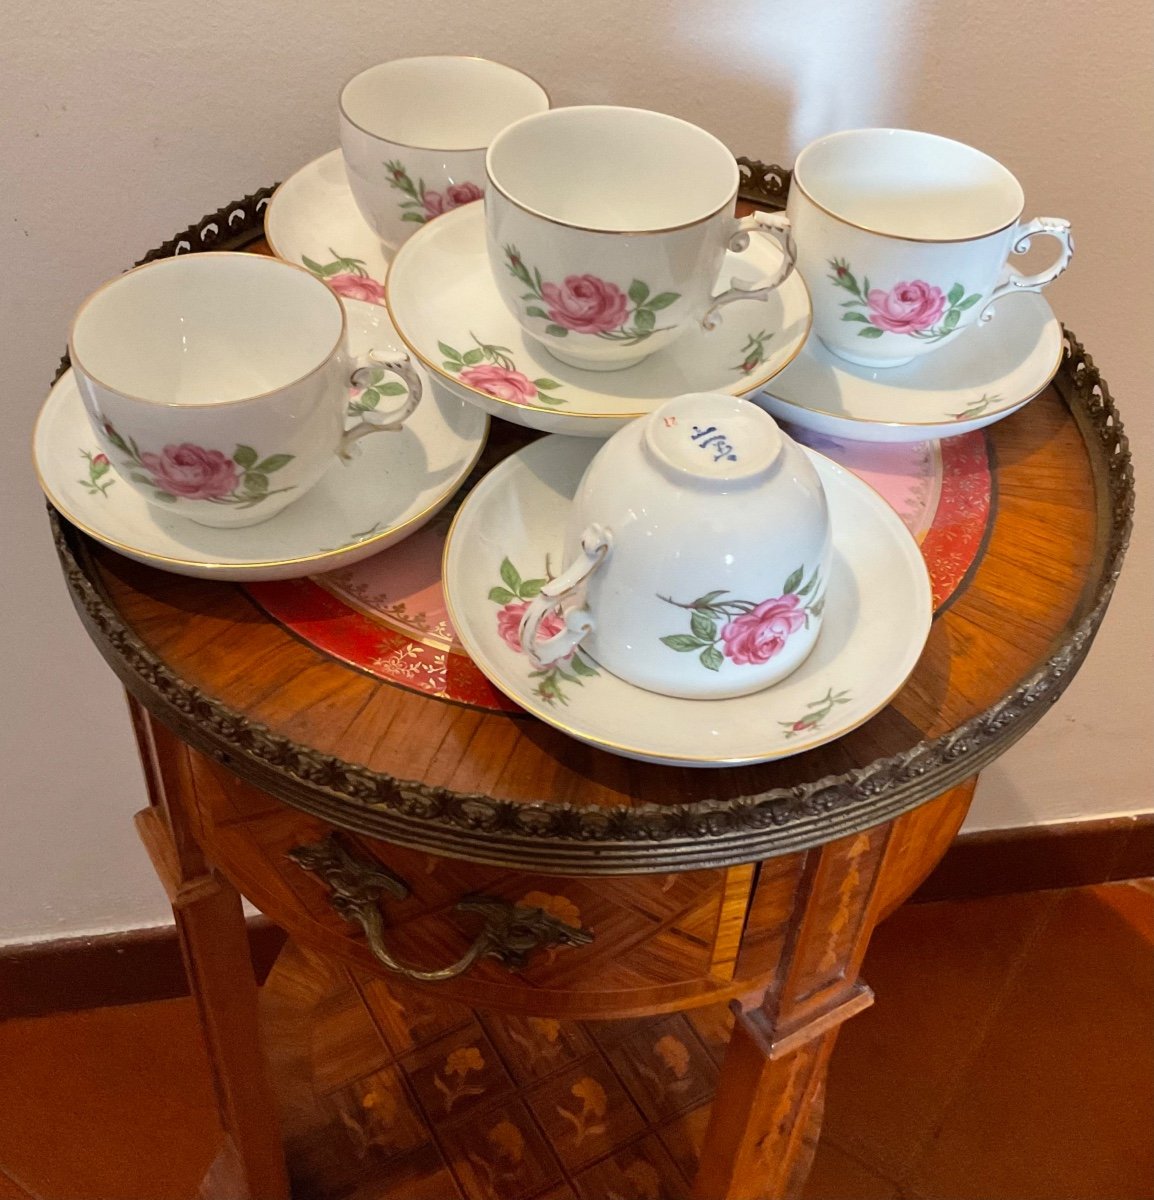 Furstenberg Old Porcelain Service Of 5 Cups And Saucers, Germany